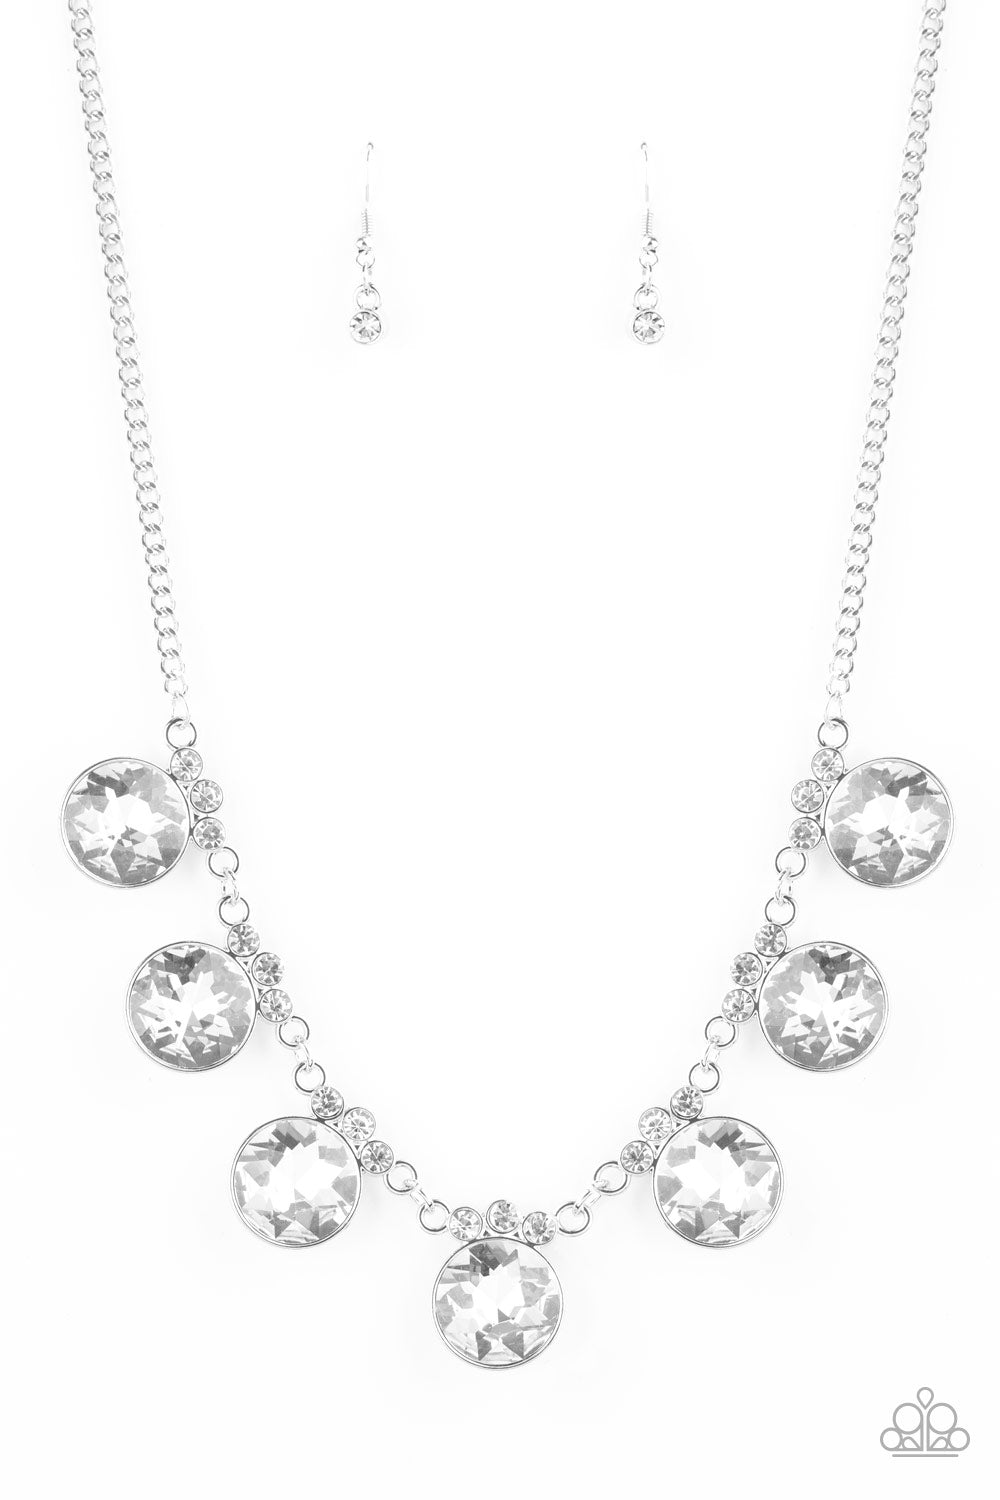 Paparazzi GLOW-Getter Glamour White Short Necklace